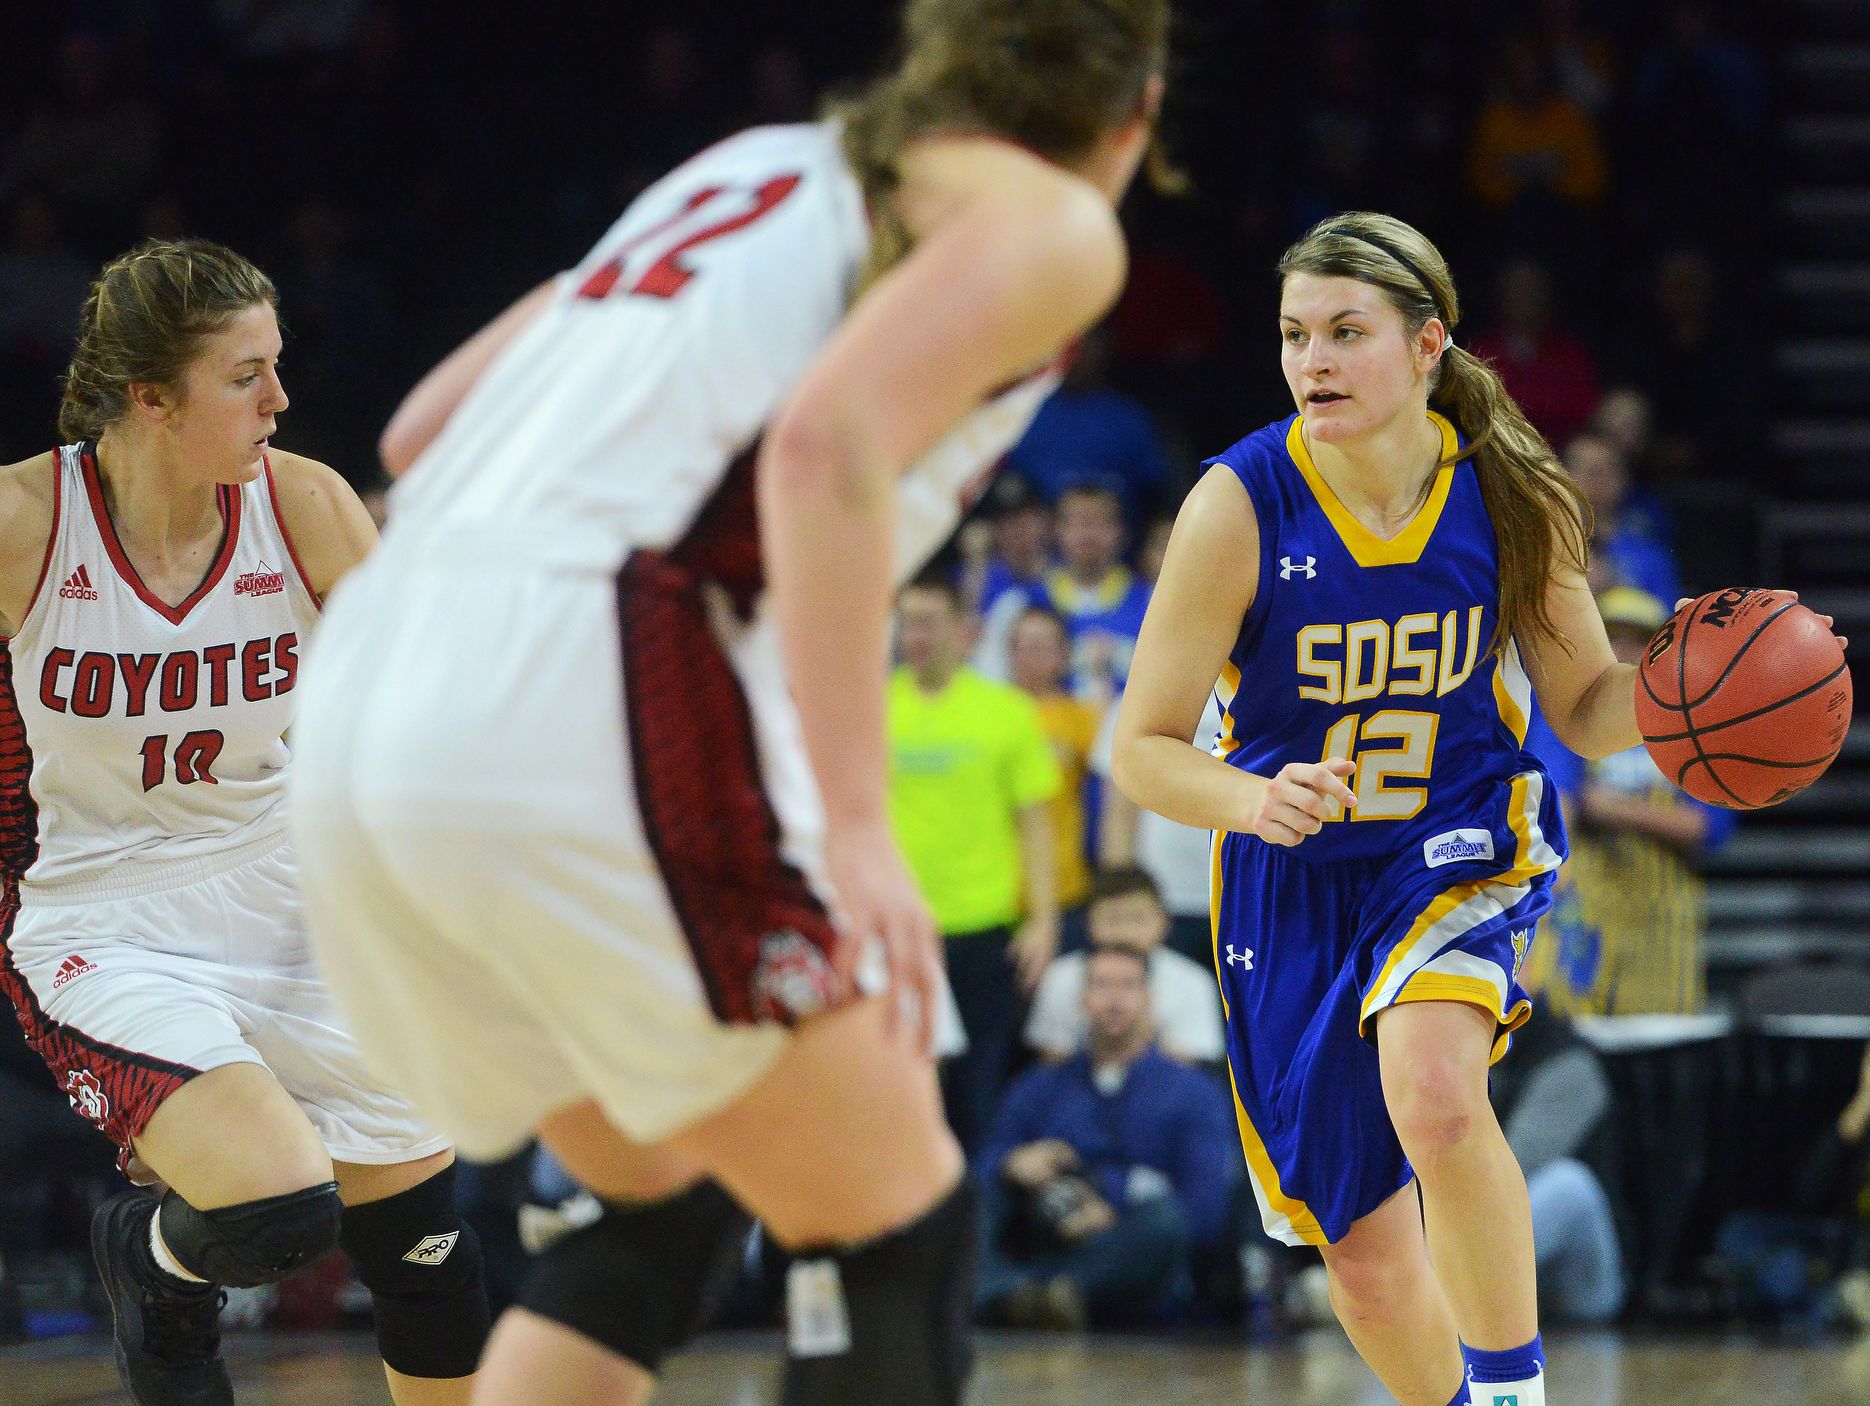 SDSU's Macy Miller (12) dribbles down the court alongside USD's Allison Arens (10) in the Summit League women's basketball championship Tuesday at the Denny Sanford Premier Center in Sioux Falls, S.D. March 8, 2016. SDSU beat USD 61-55.